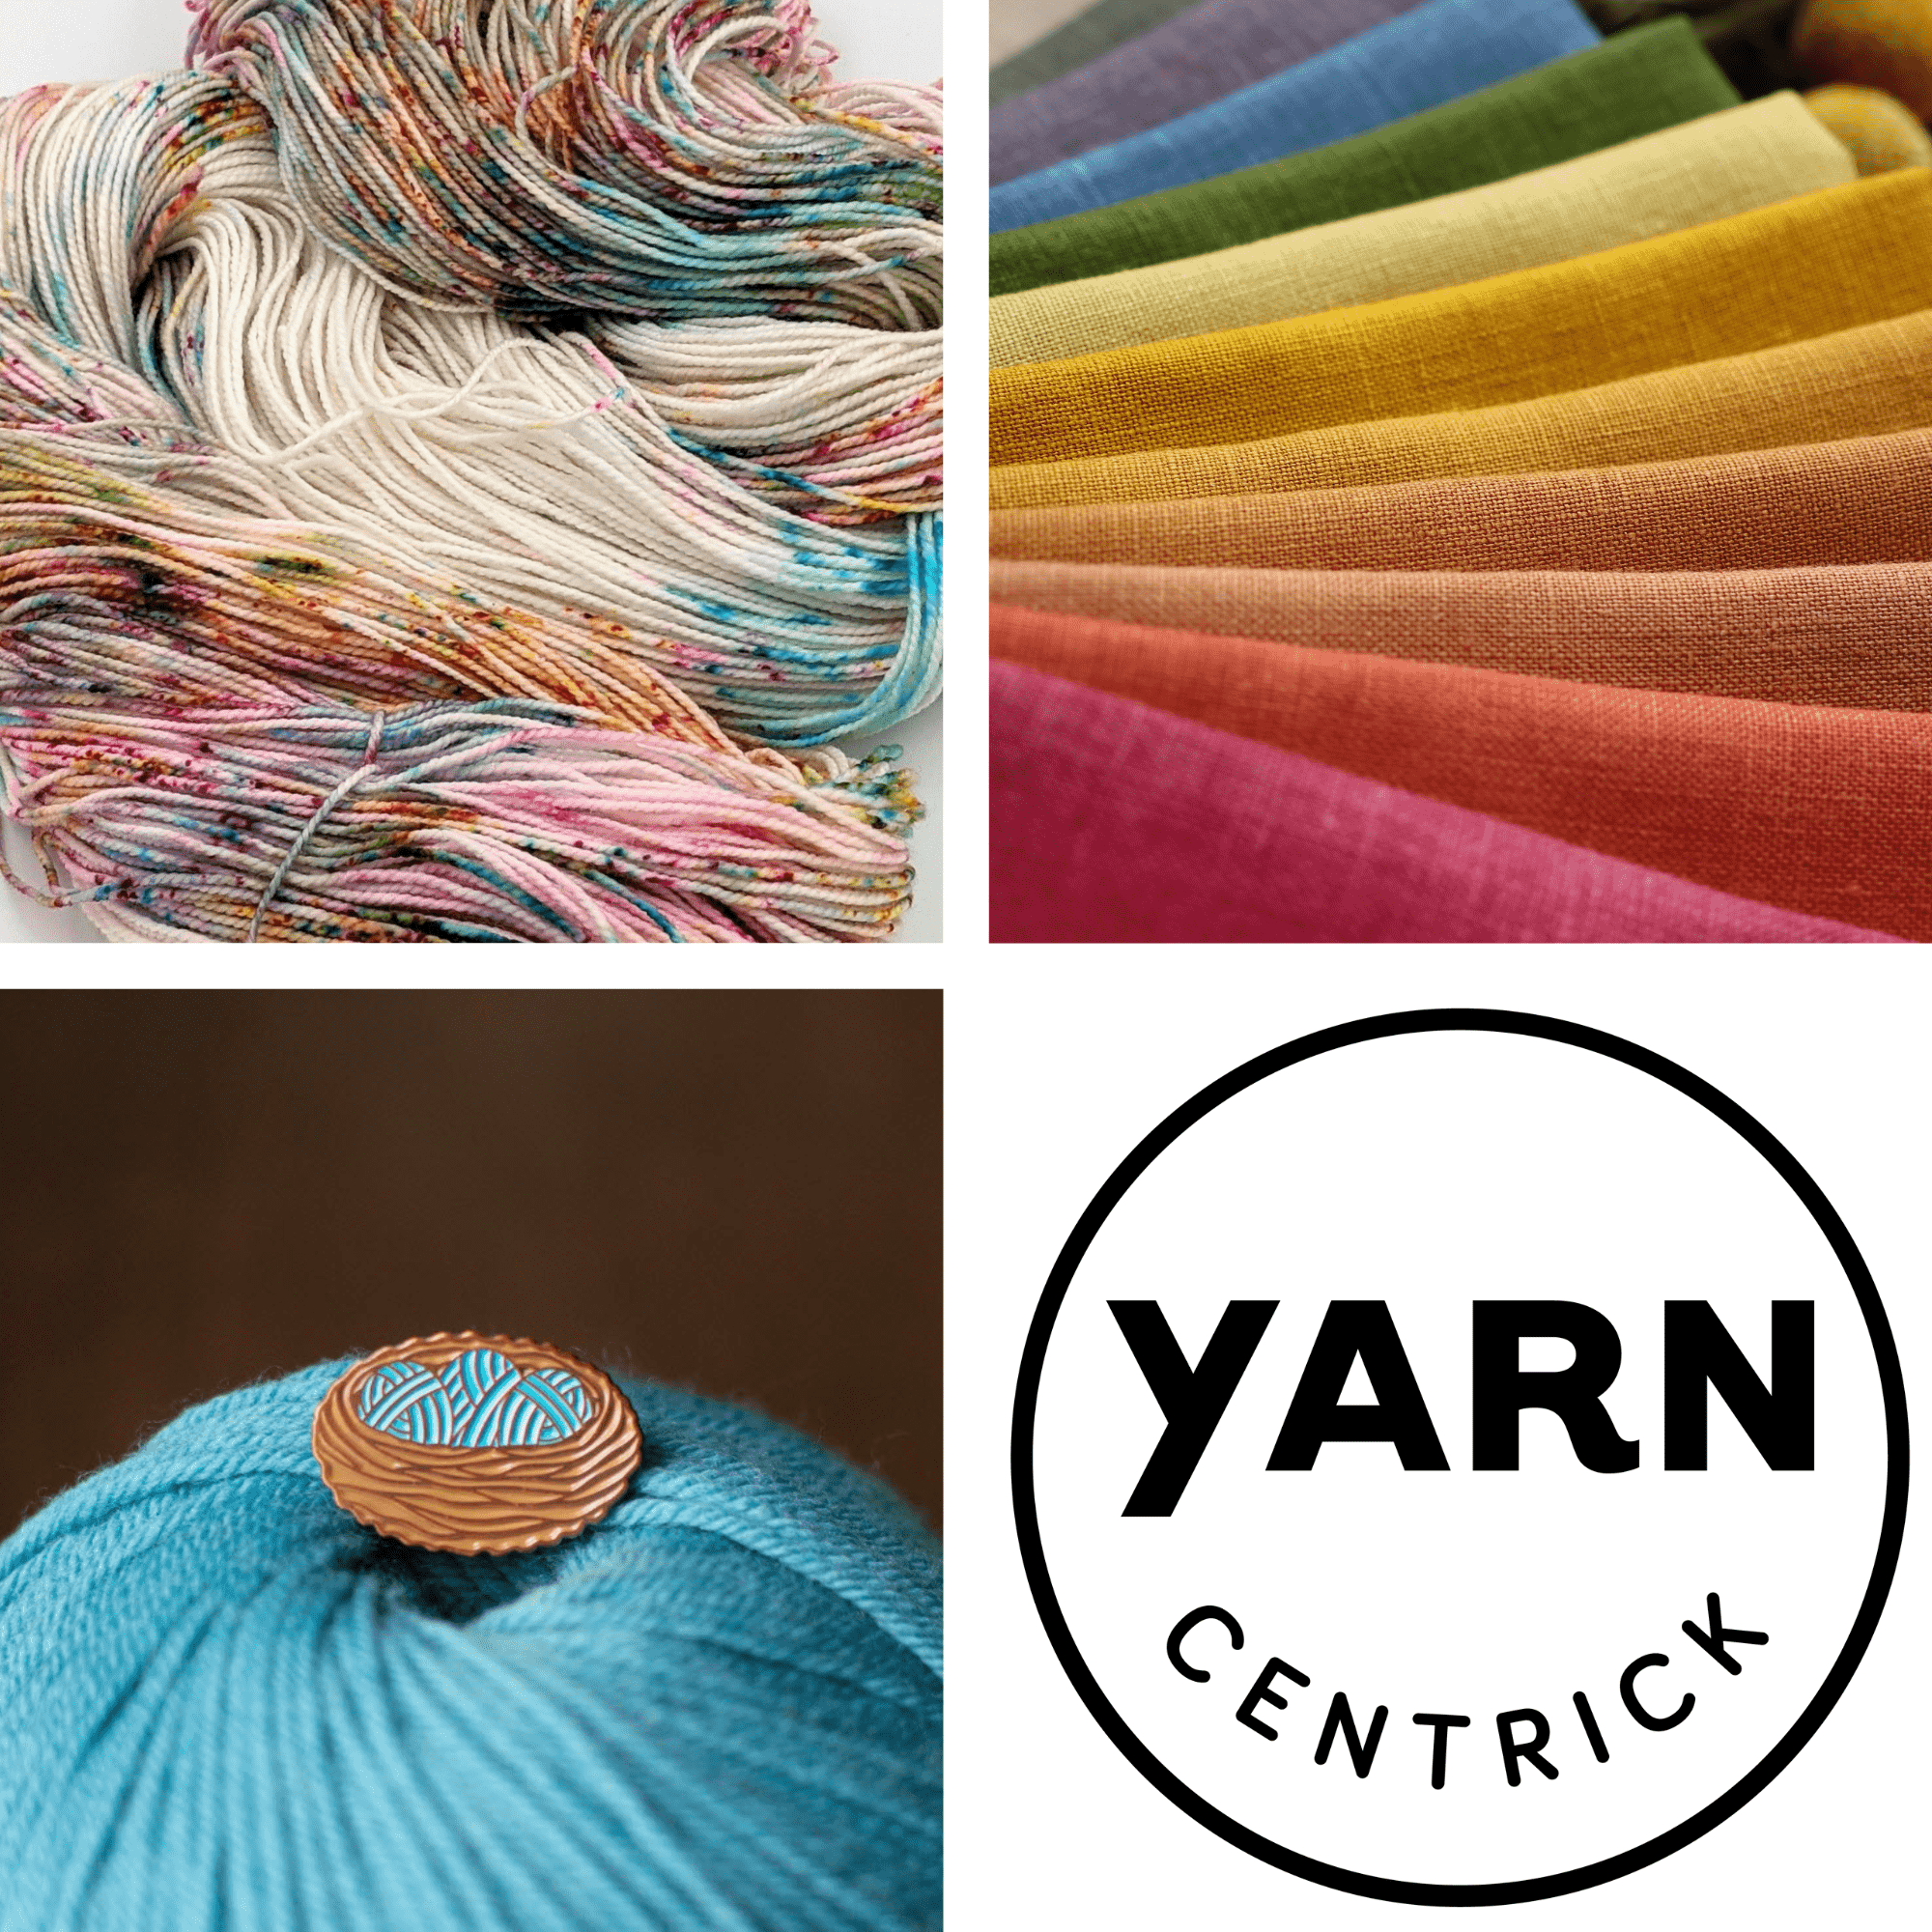 The Yarncentrick logo, a brightly colored skein of speckled yarn, swatches of fabric in a variety of colors, a blue cake of yarn with a birds nest pin with blue eggs in it.